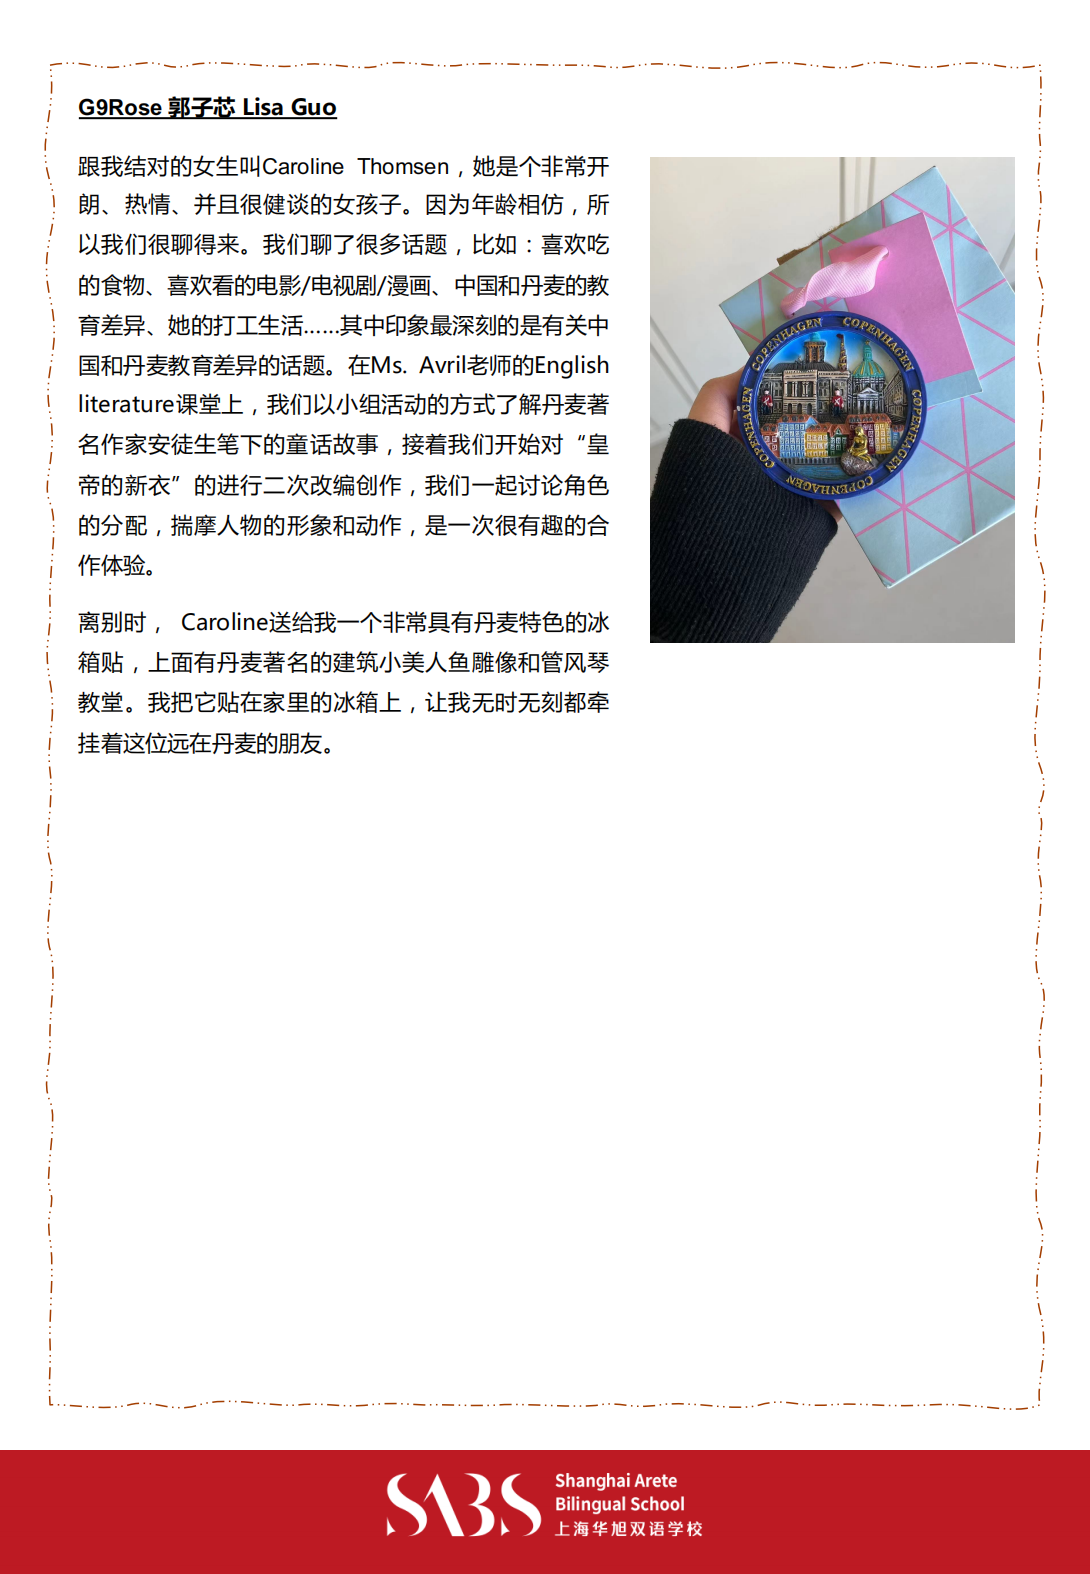 HS 4th Issue Newsletter pptx（Chinese）_07.png